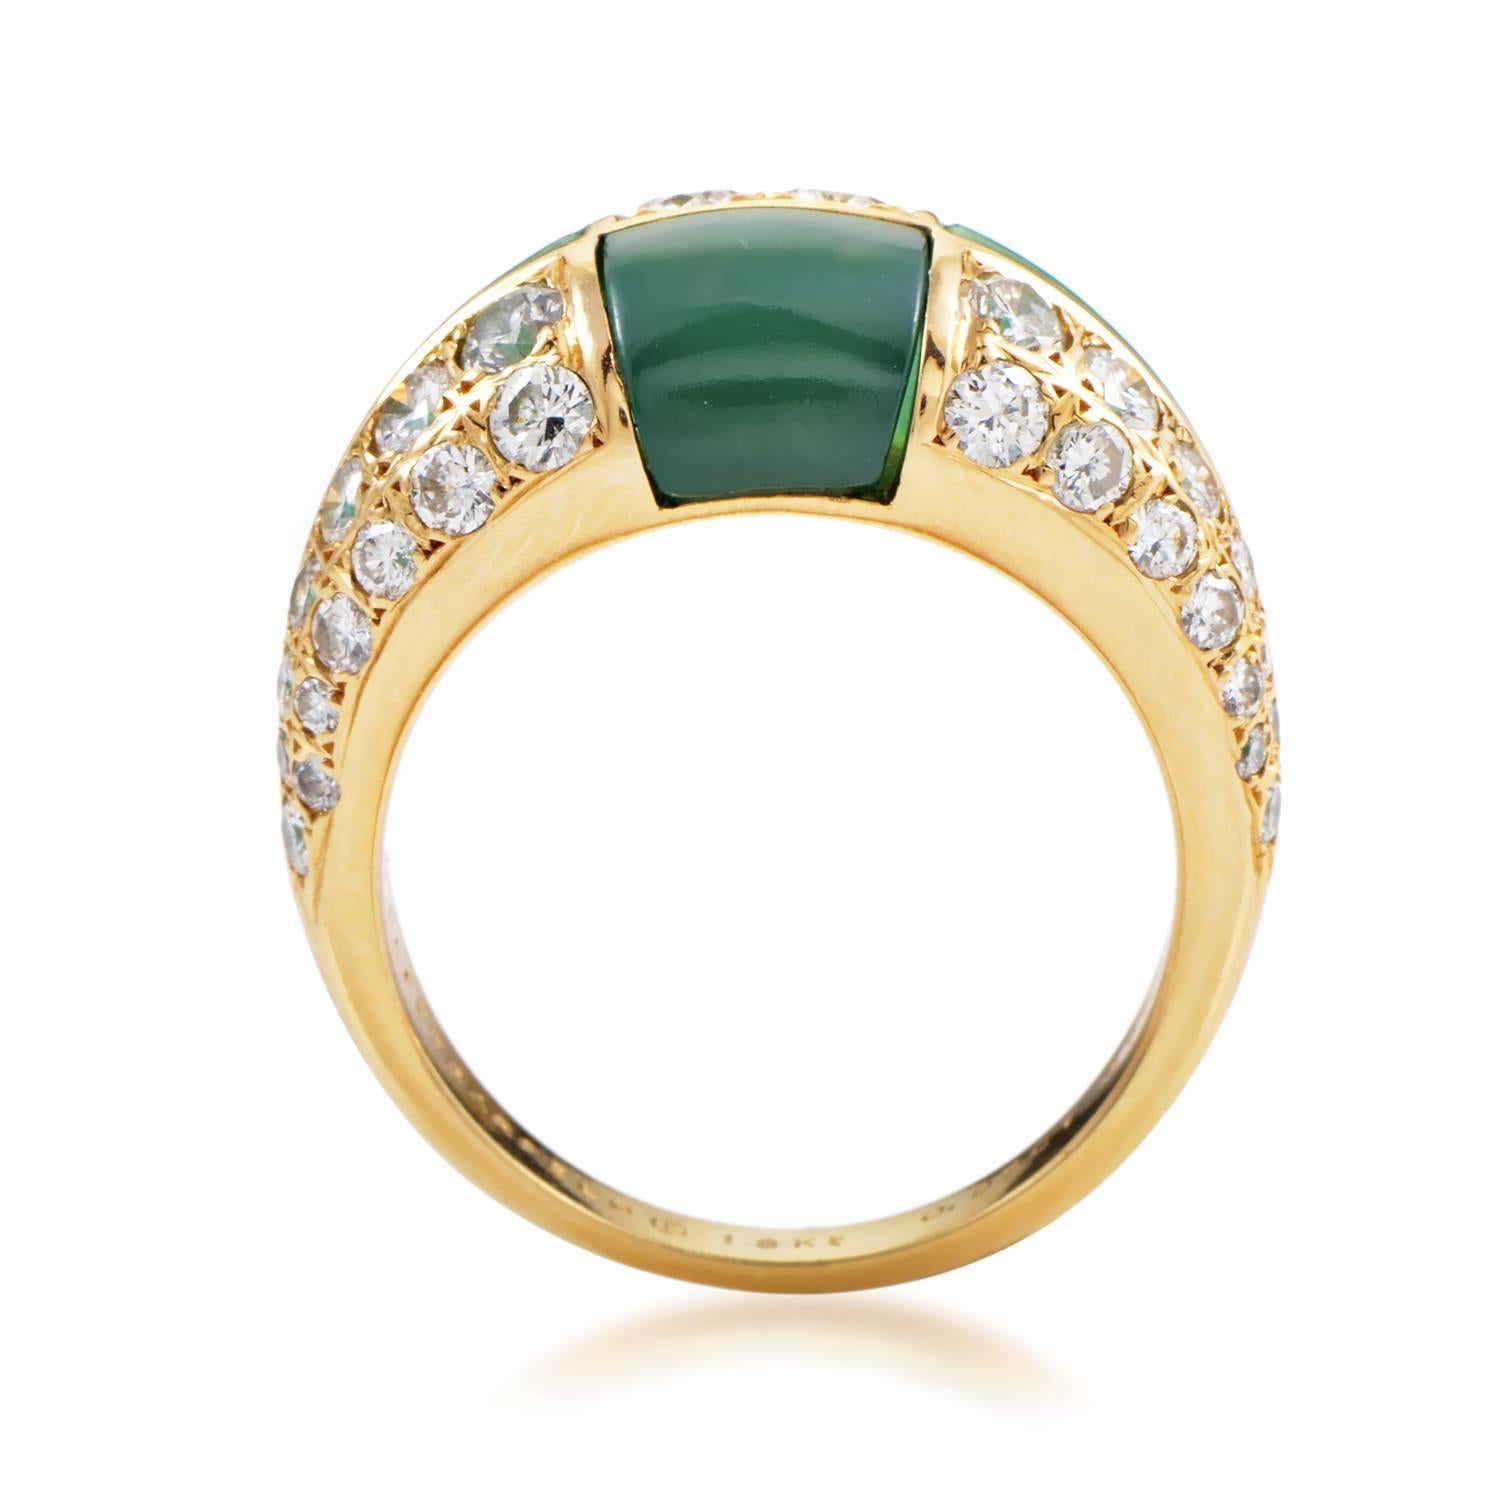 Alternating between the fantastic nuance of the chrysoprase stone and the glamorous blend of warm 18K yellow gold and scintillating diamonds totaling 0.95ct, this stunning ring from Van Cleef & Arpels will catch your eye and charm you with its